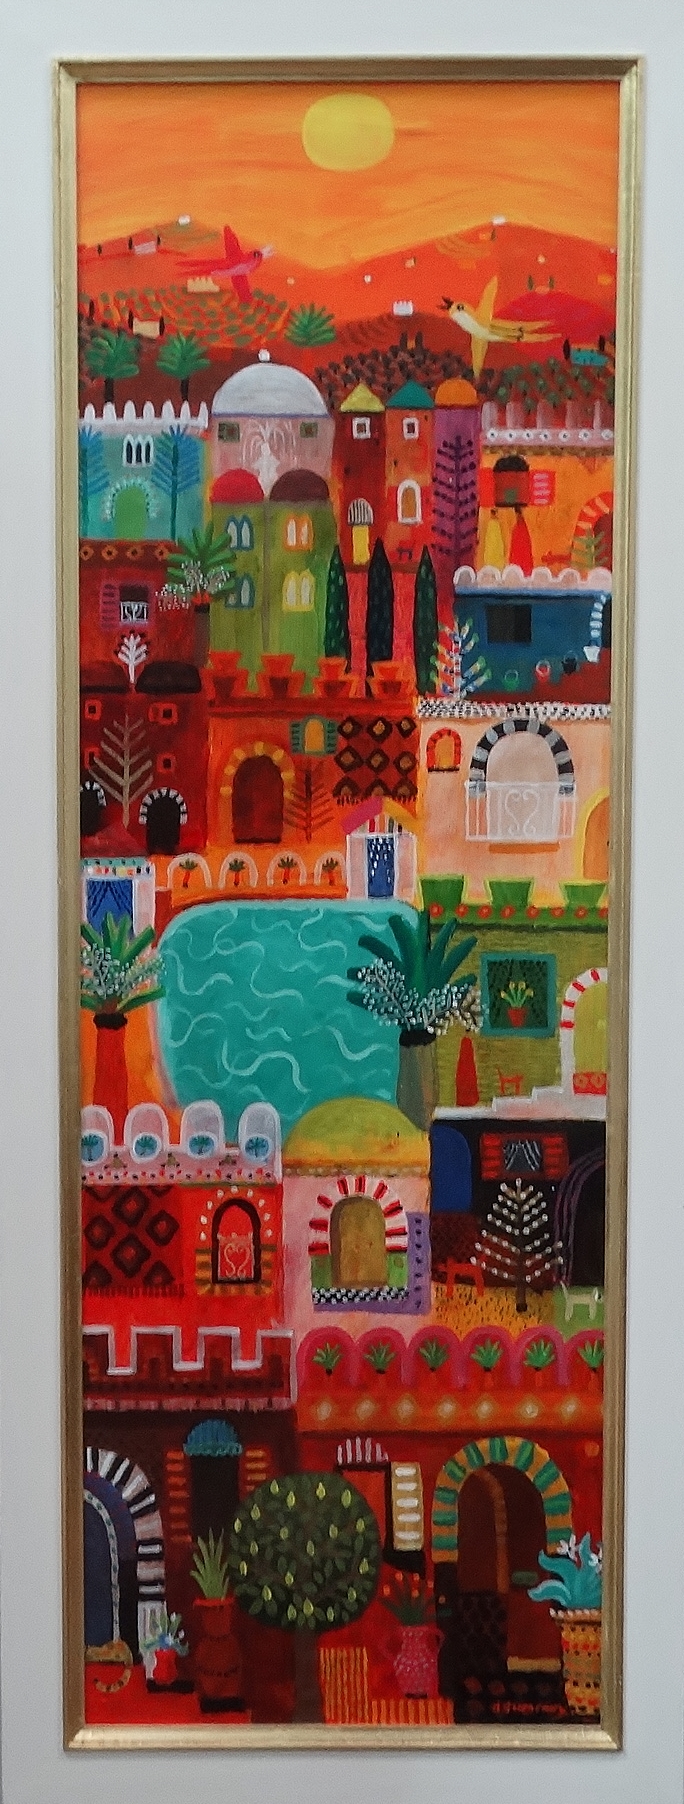 ALAN FURNEAUX (1953) Marrakesh Oil on board Signed, signed, titled and dated 2019 verso Framed - Image 2 of 3